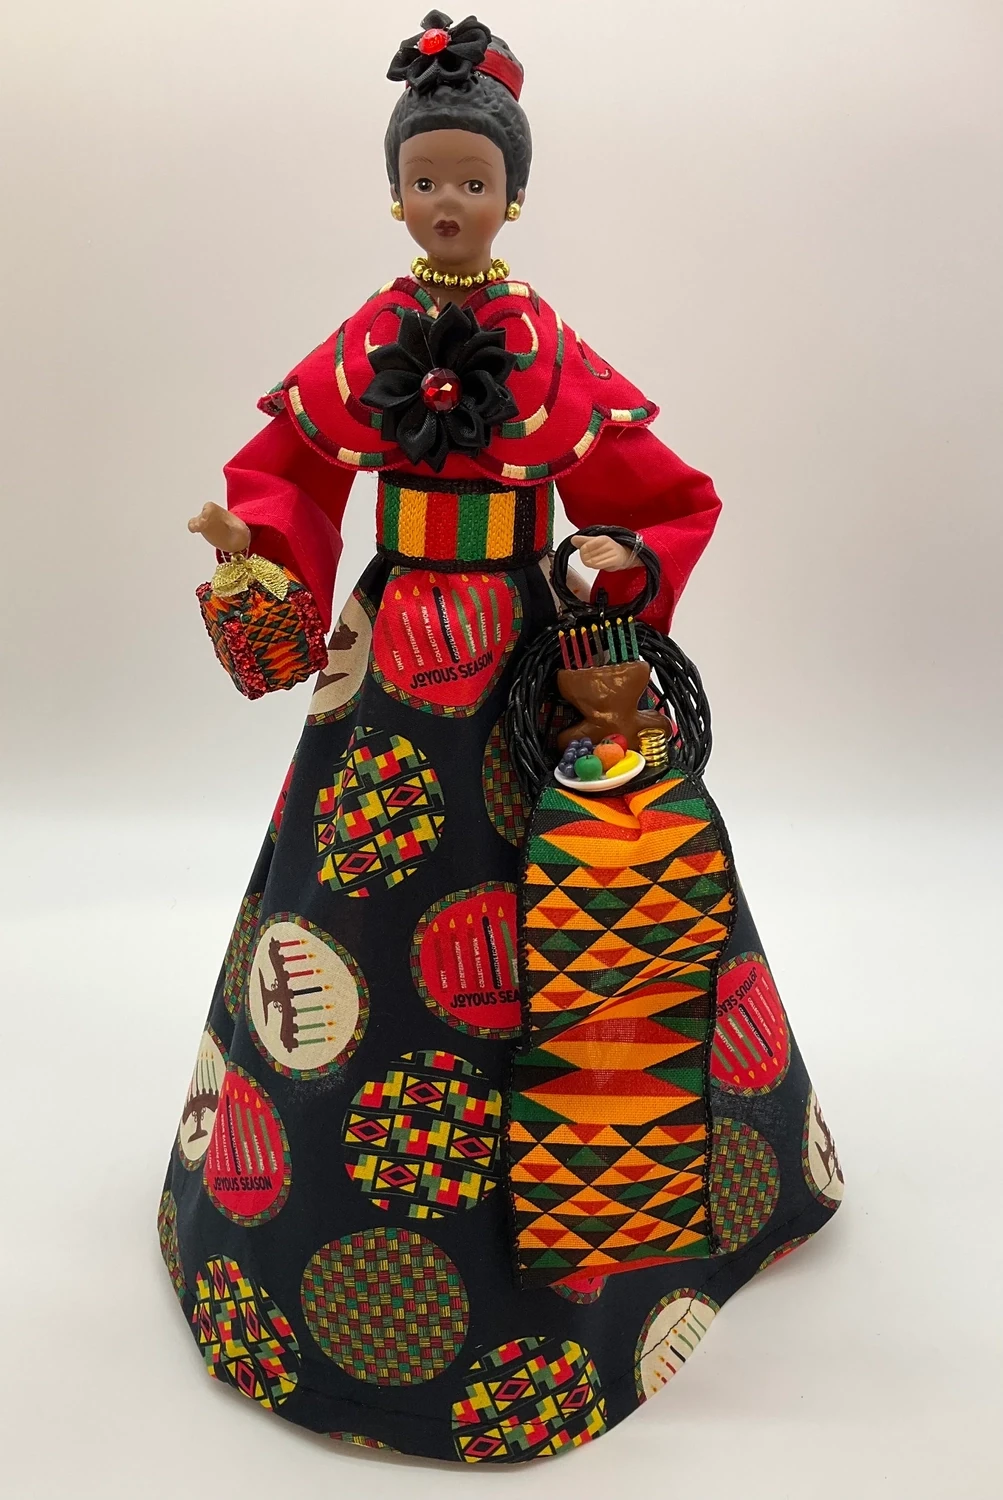 Female 16 inch Kwanzaa Figurines - Handcrafted with symbols of Unity, Purpose and Creativity, Please select your Kwanzaa Figurine: Kwanzaa Female - Circles (Red)